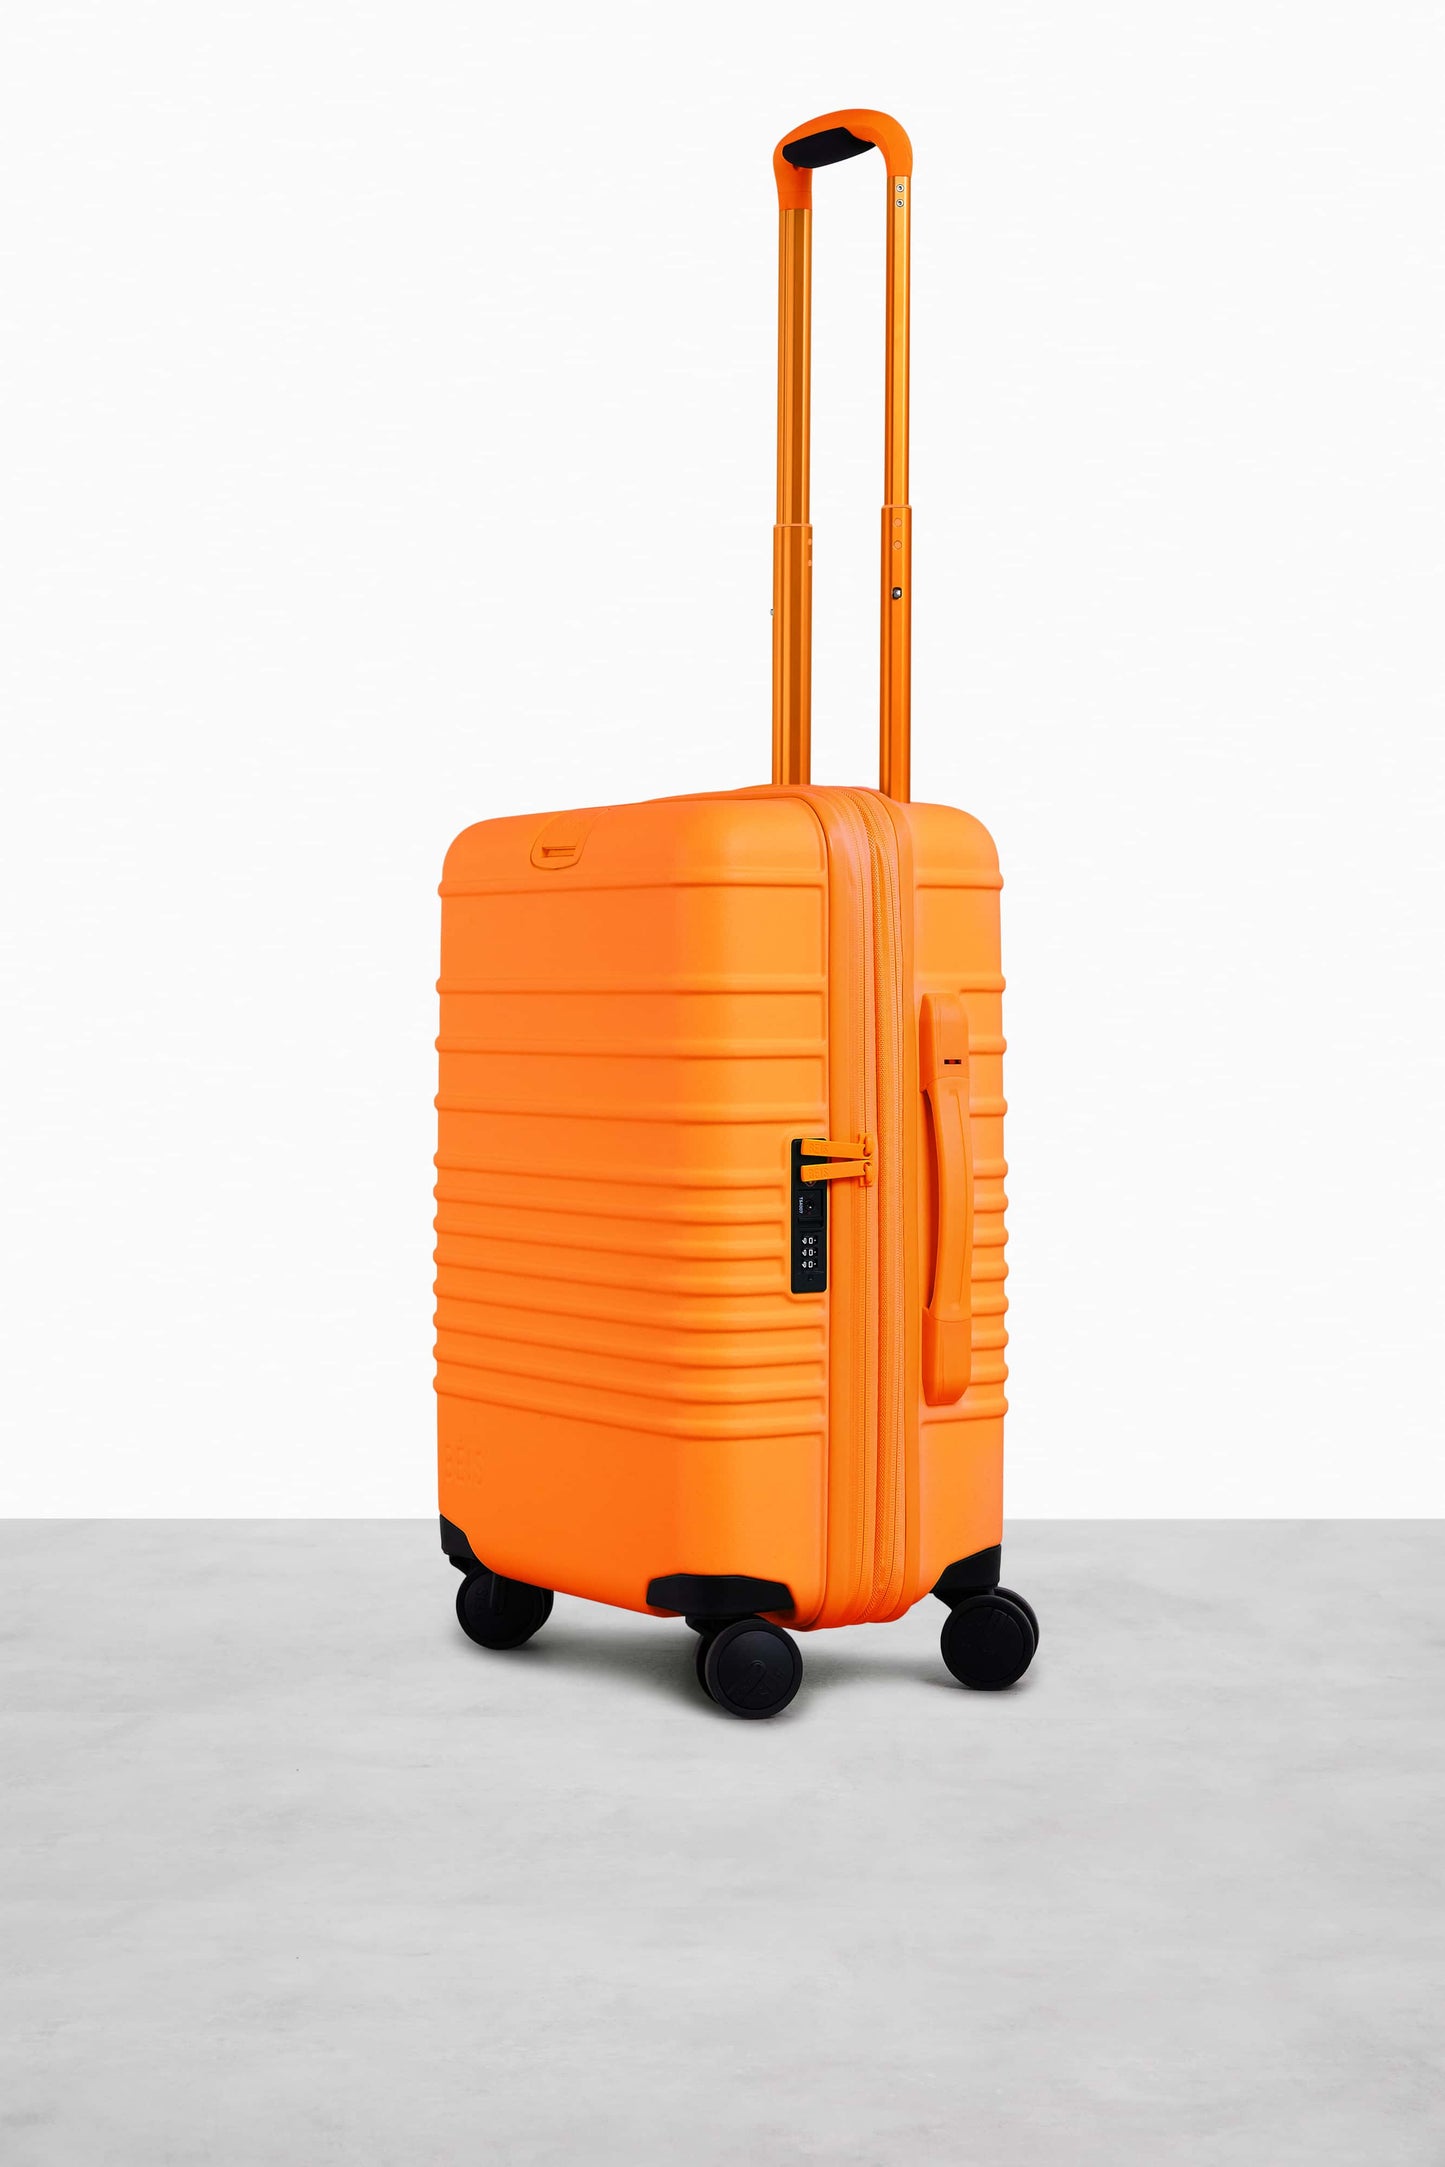 Le Carry-On Roller en Creamsicle